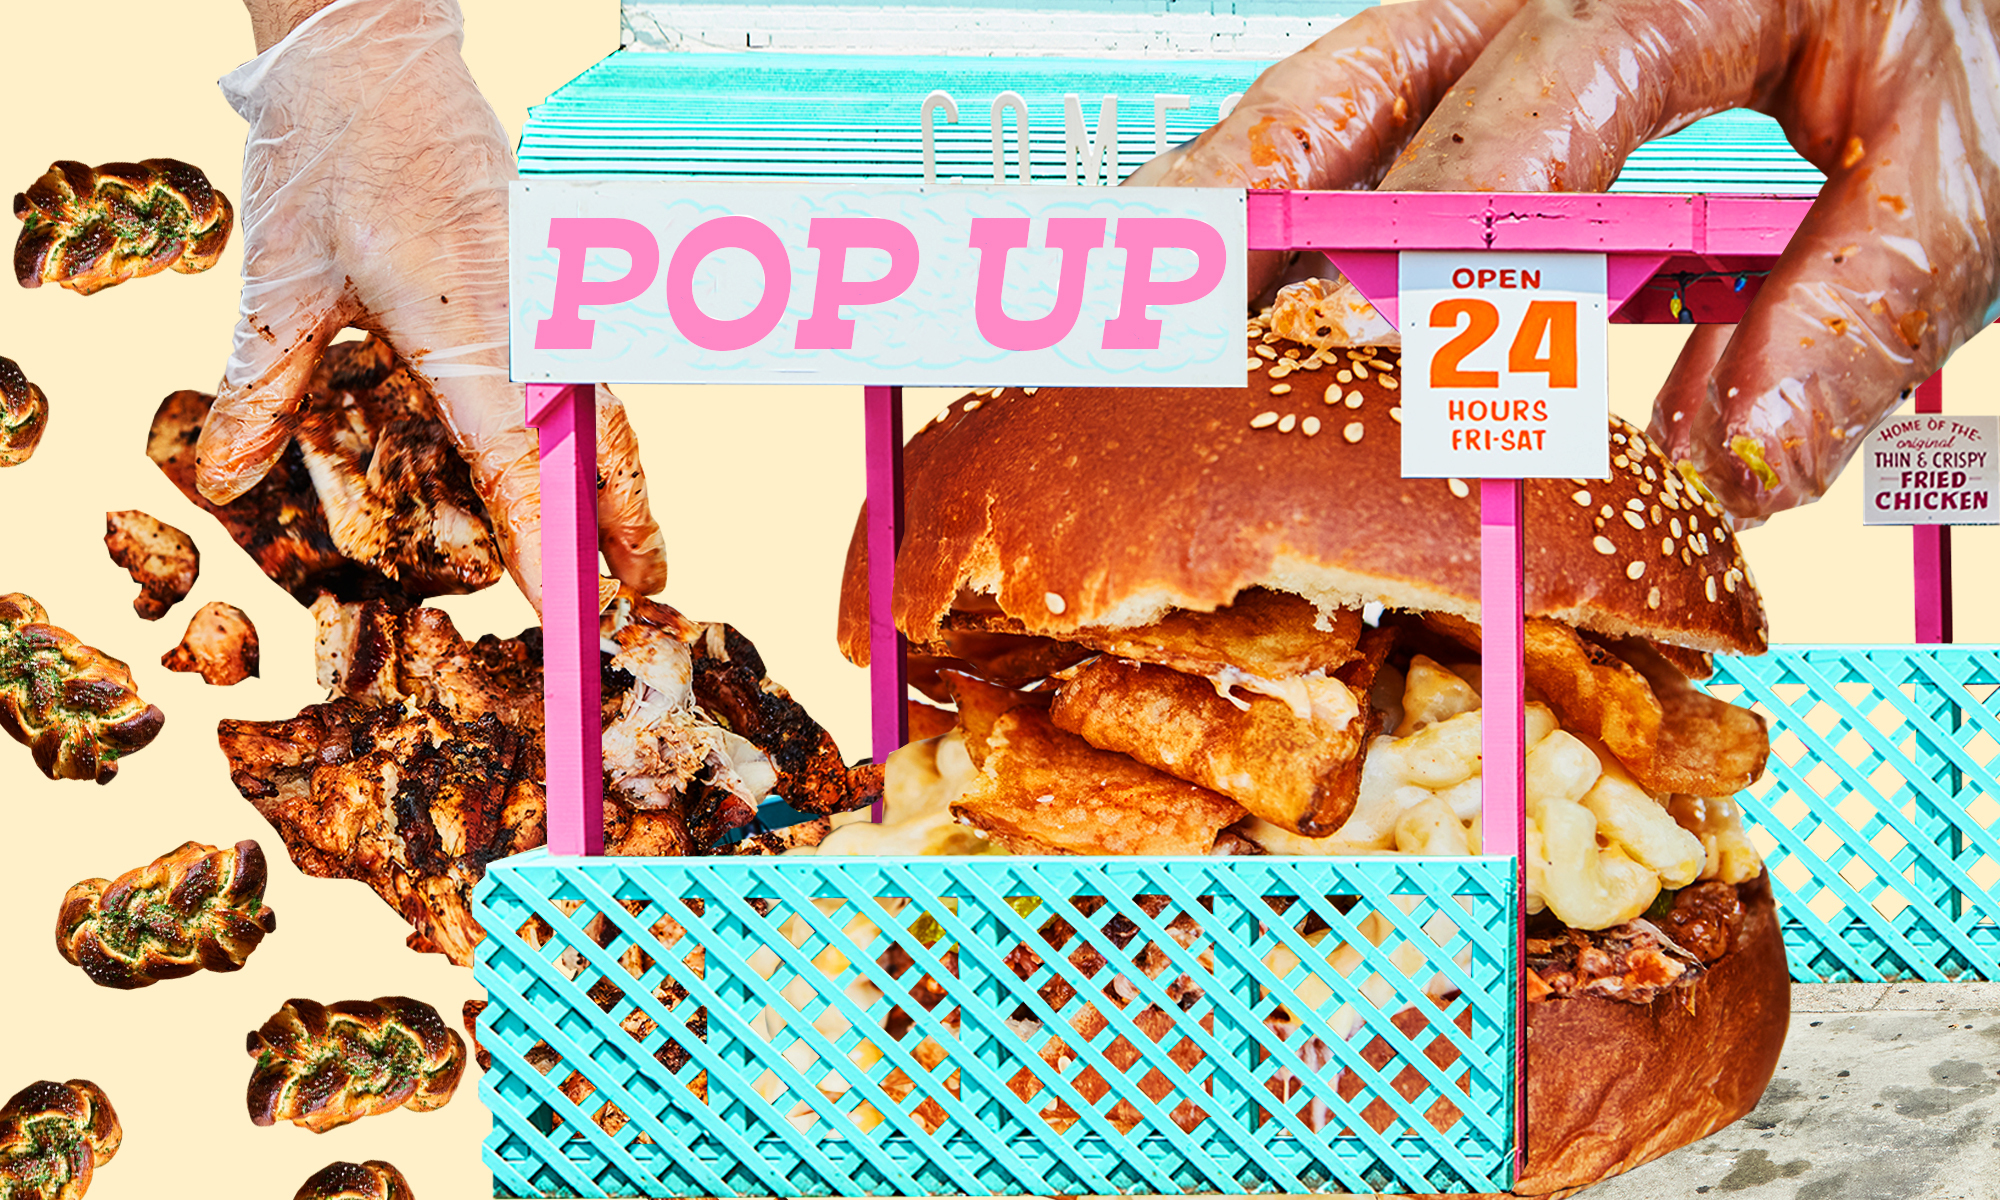 A photo collage featuring challah, gloved hands assembling a sandwich, and a food stand with a sign that says “pop-up”